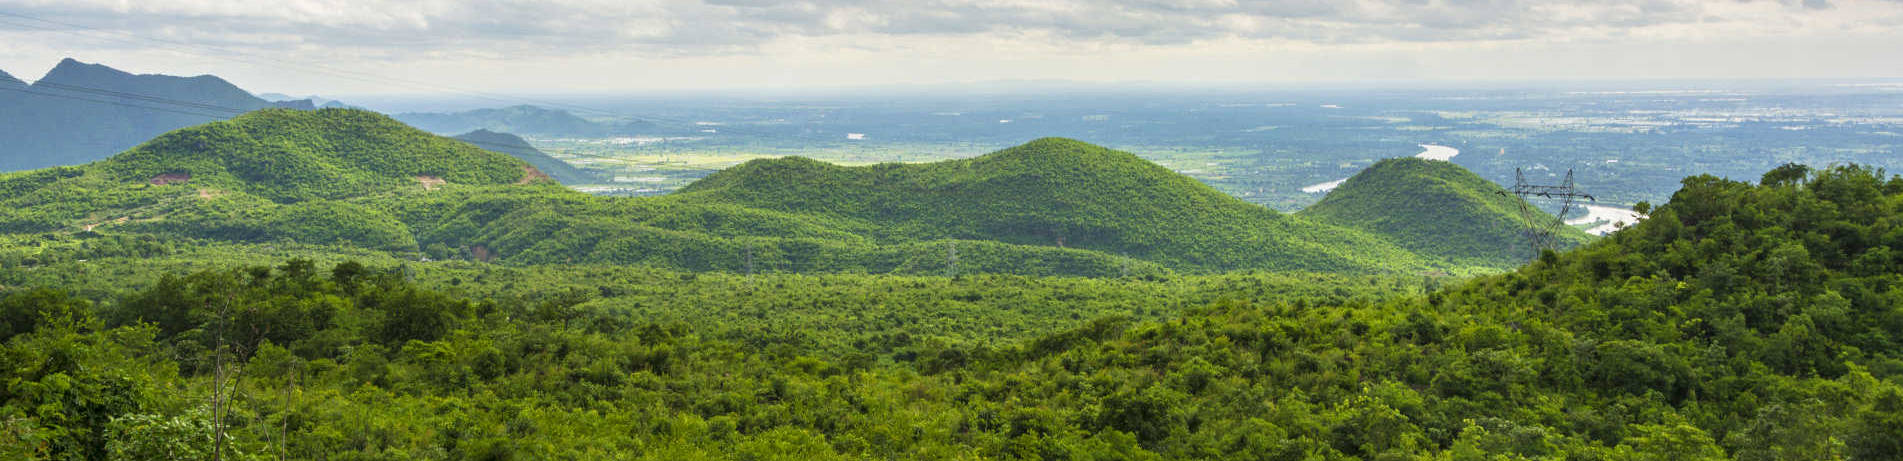 Forested hills in Myanmar